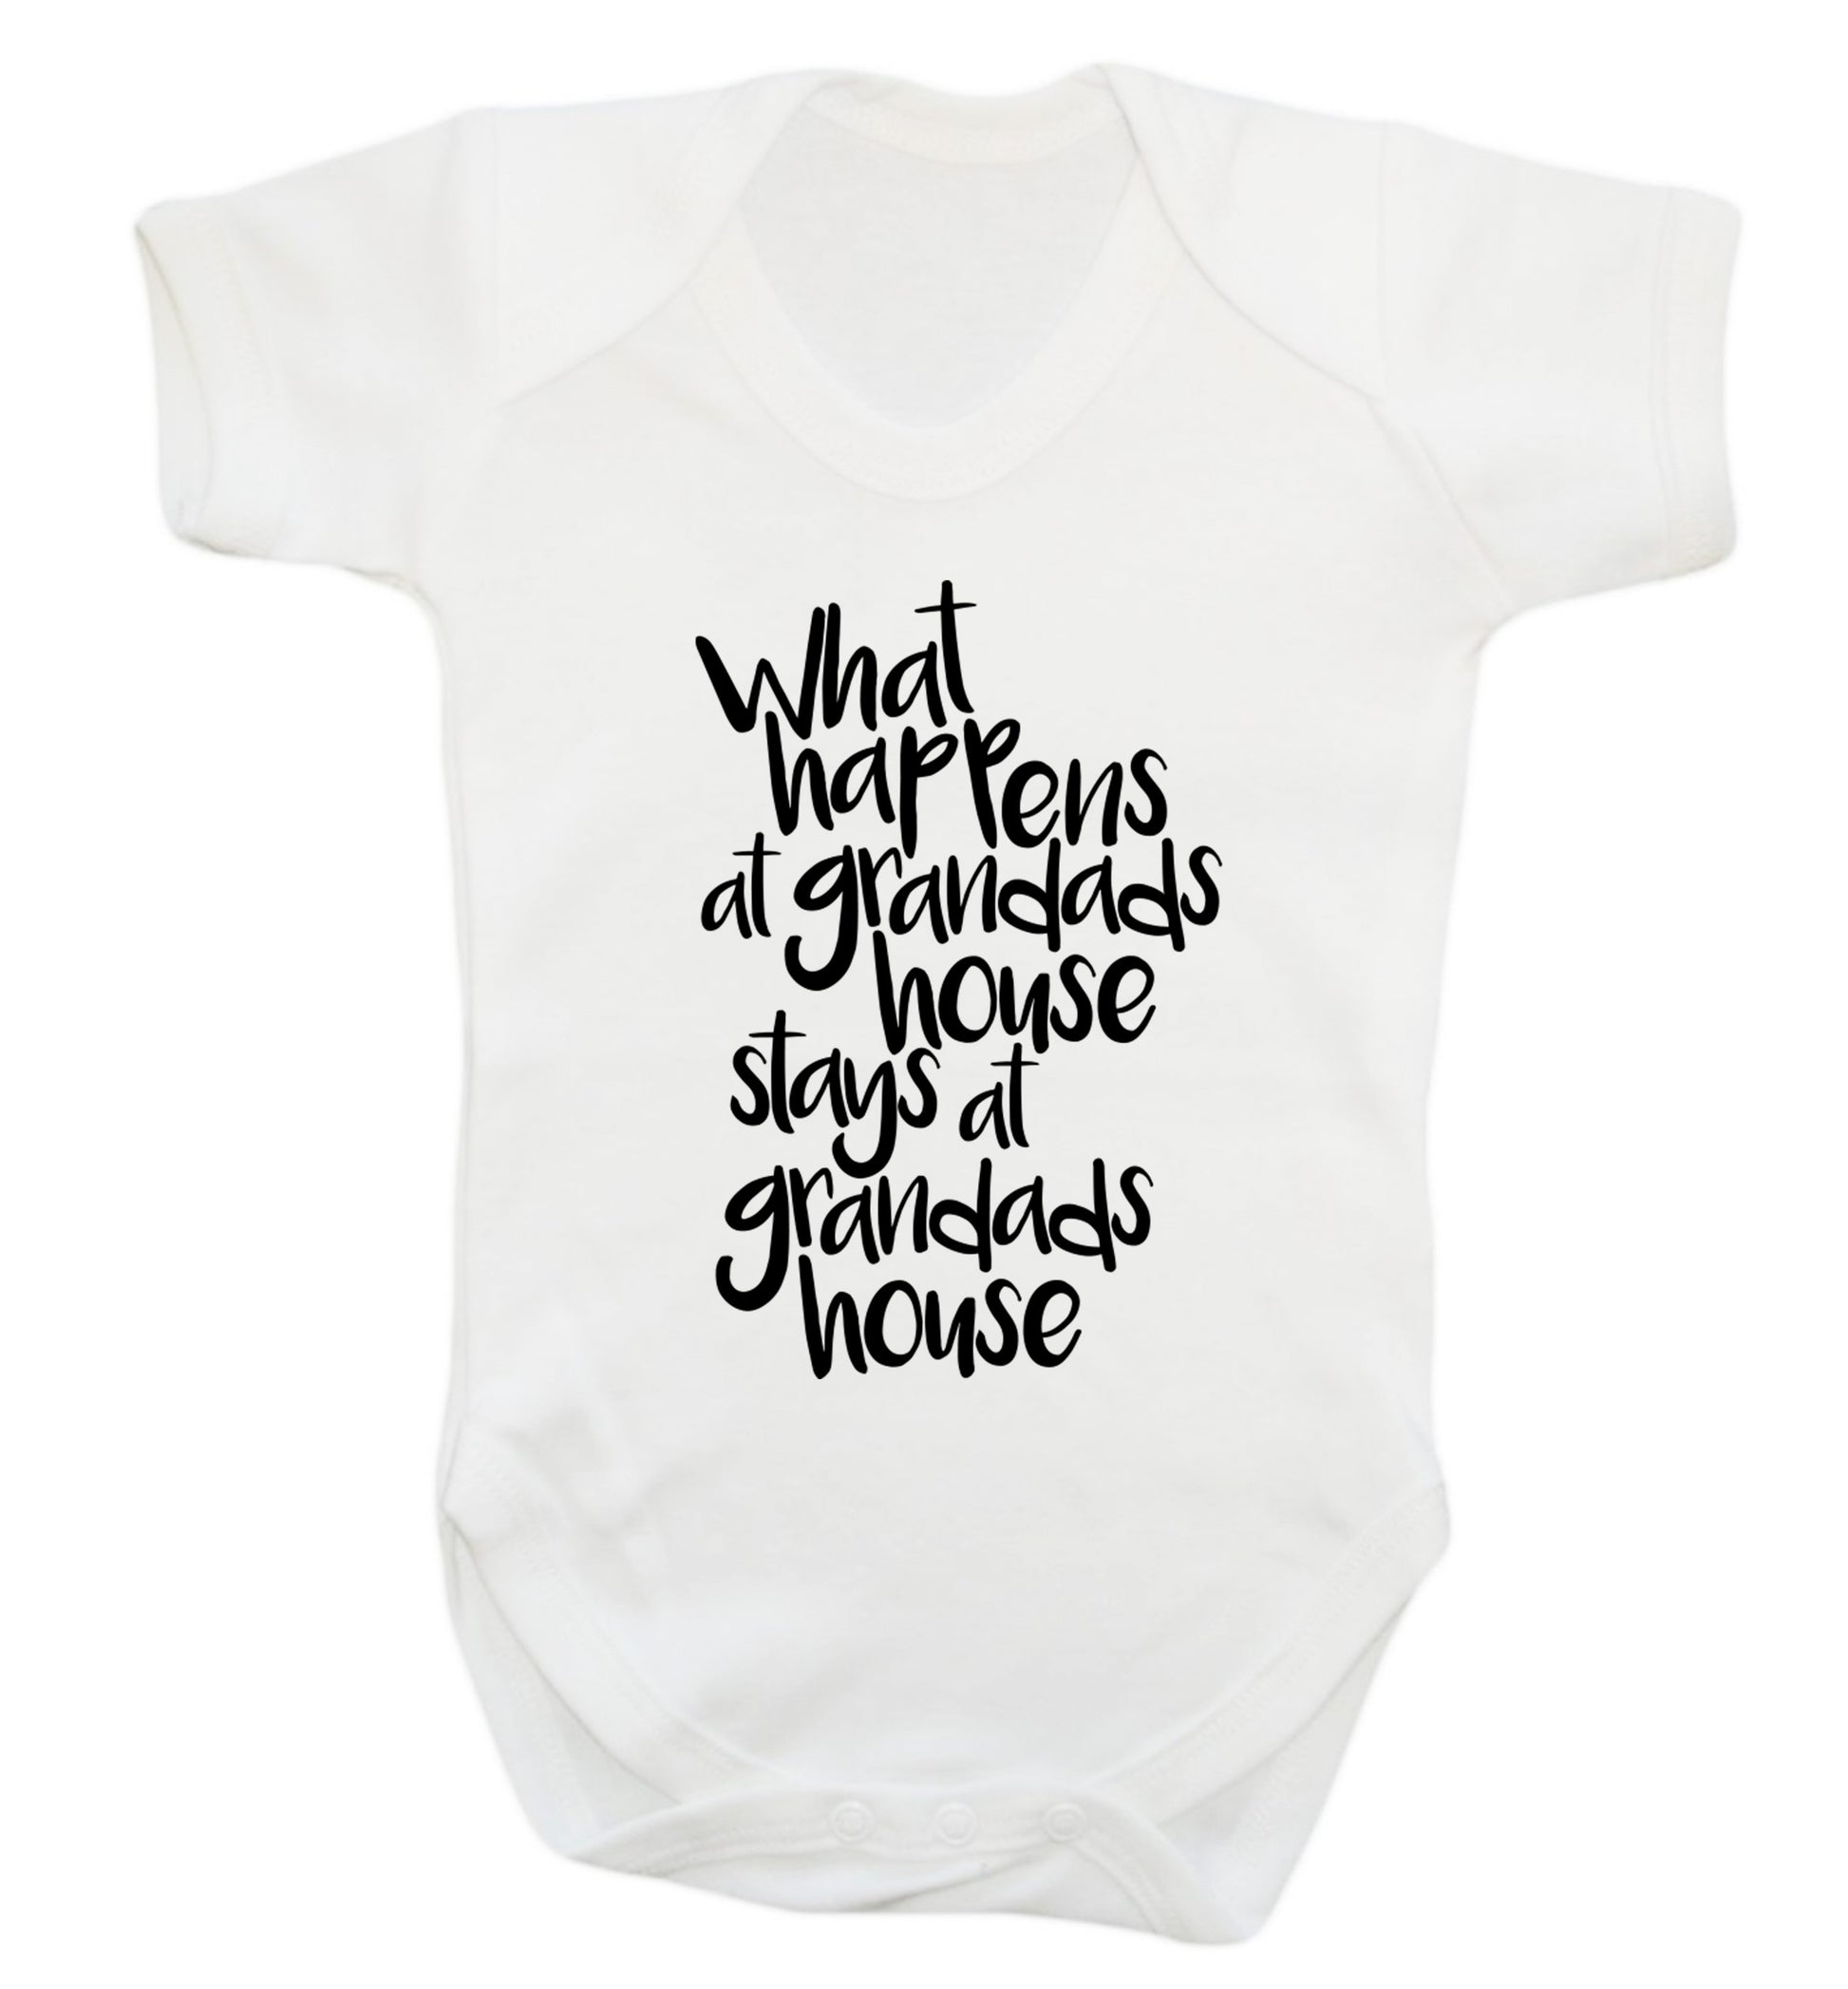 What happens at grandads house stays at grandads house Baby Vest white 18-24 months